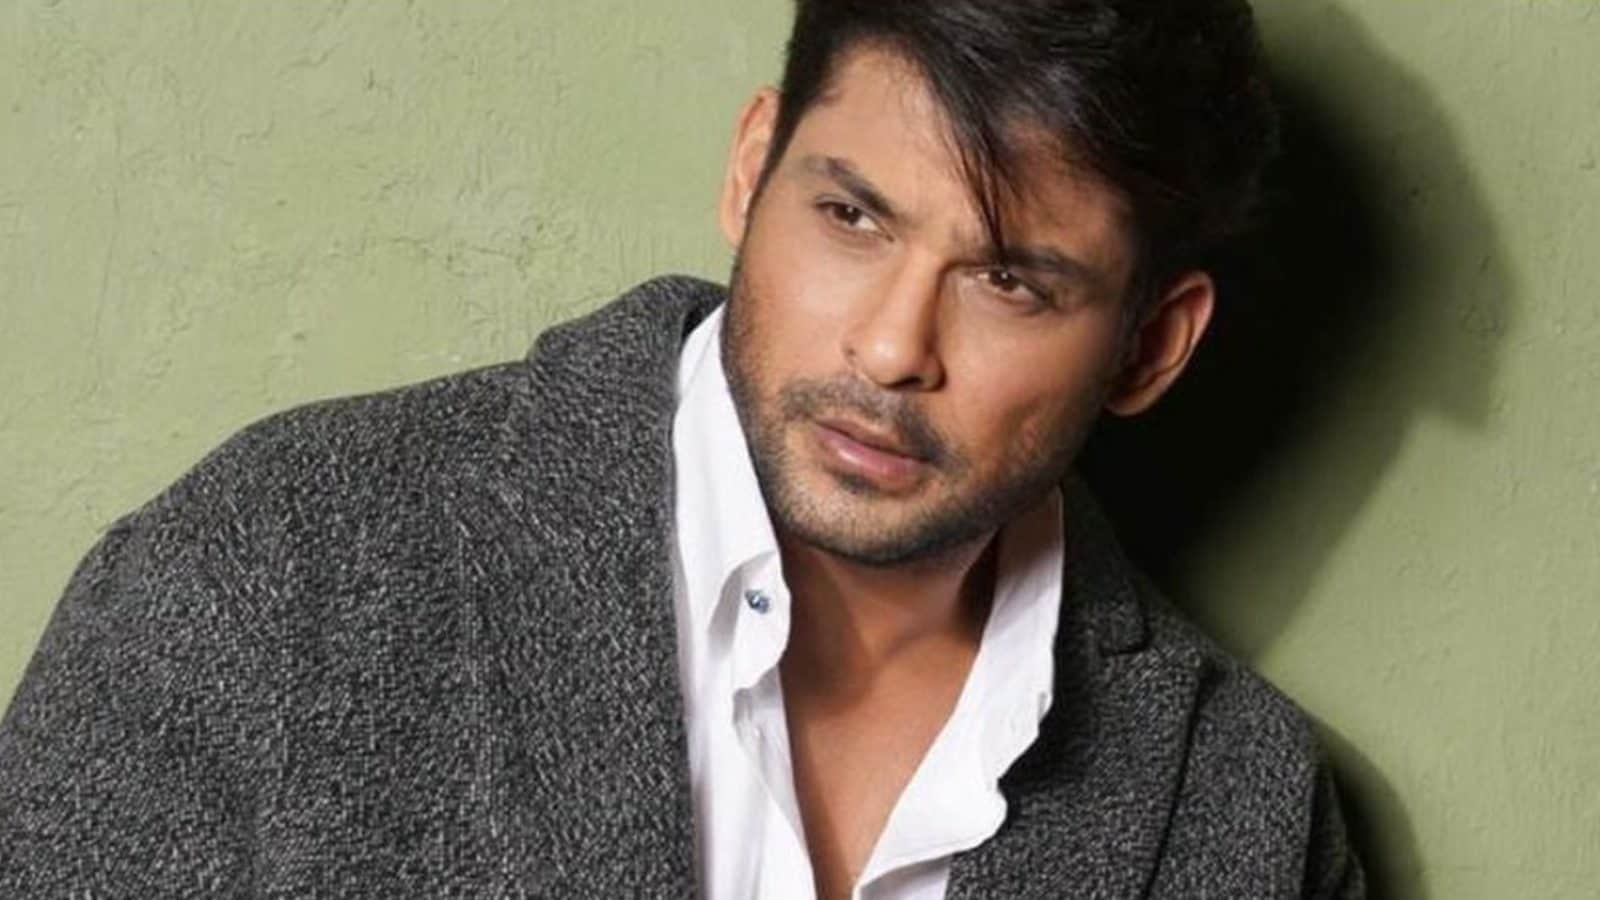 Sidharth Shukla Birth Anniversary: A Look Back At The Life And Career Of The Bigg Boss 13 Winner